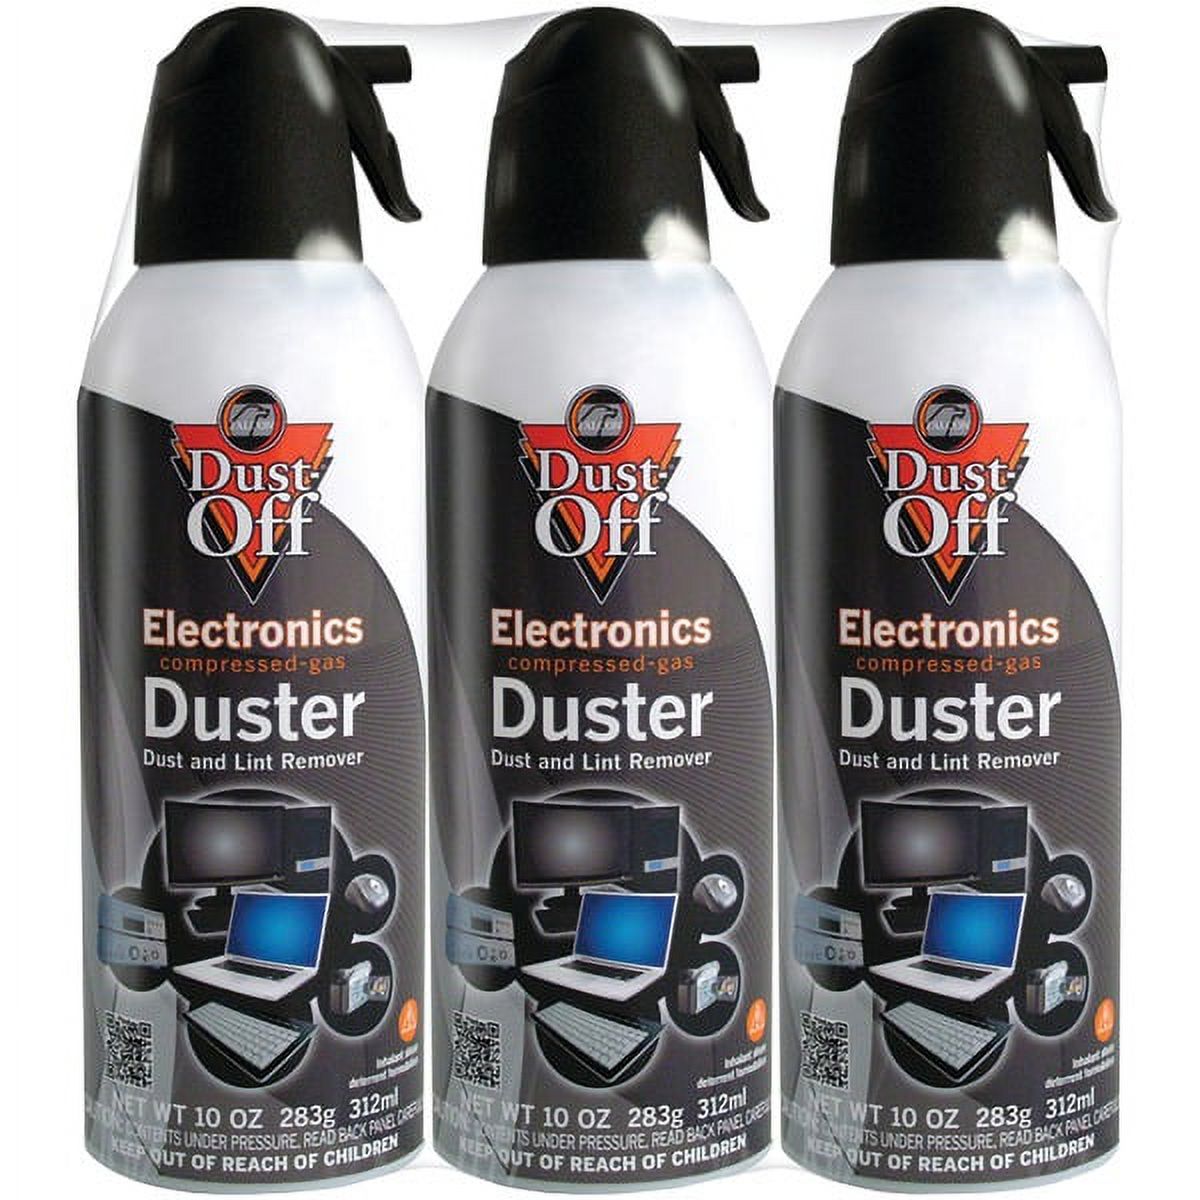 Dust-off® Disposable Dusters (3 Pk) - image 1 of 9